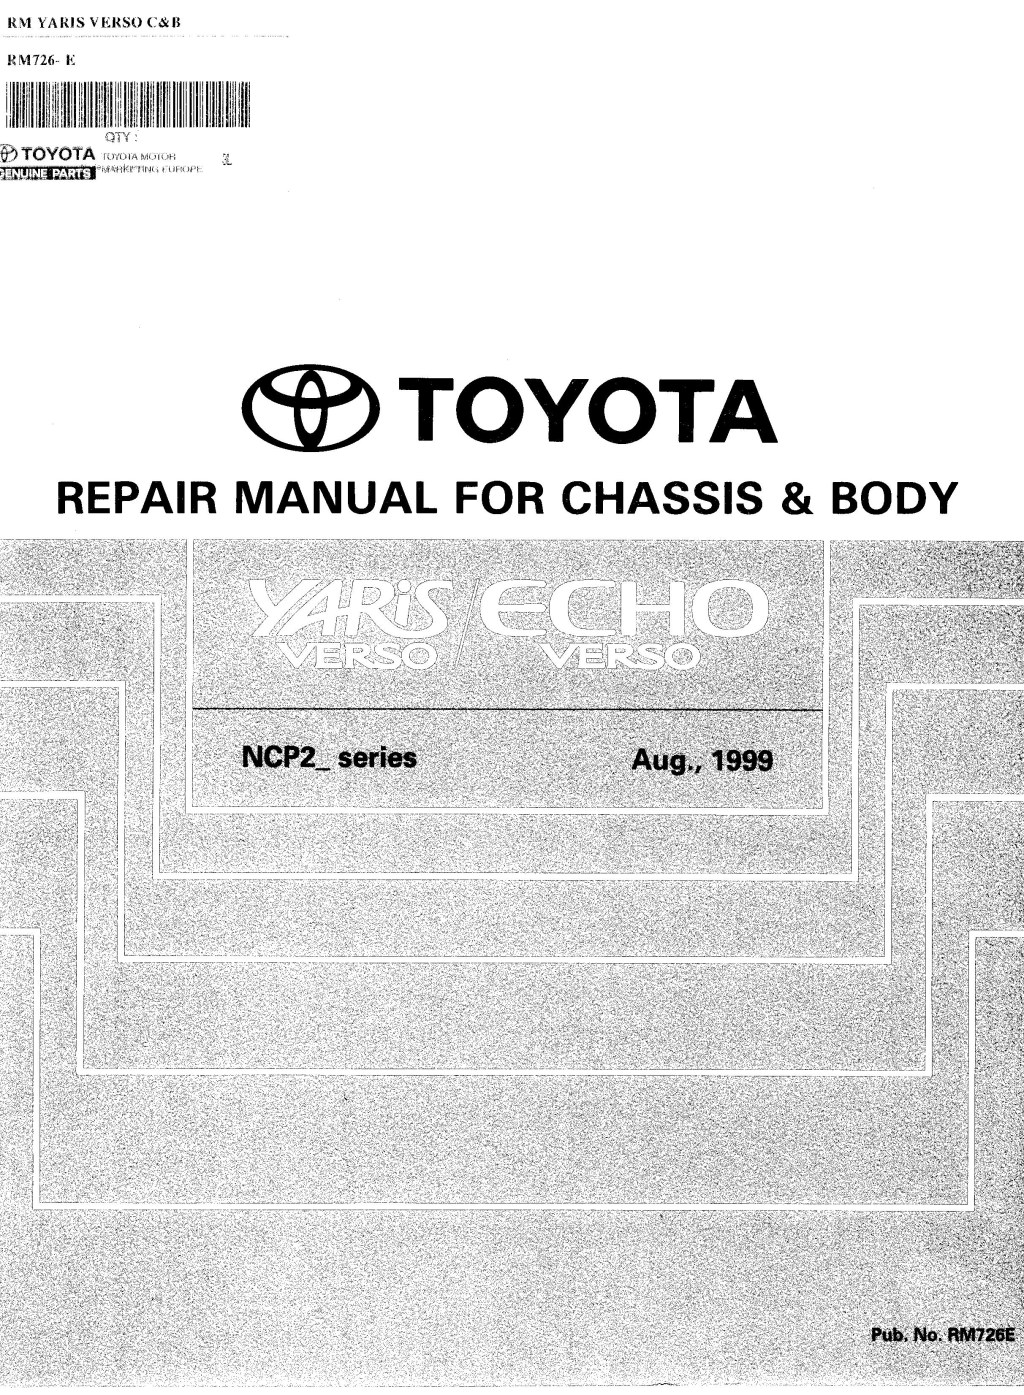 Picture of: Toyota Yaris Verso Echo Verso Service Repair Manual by